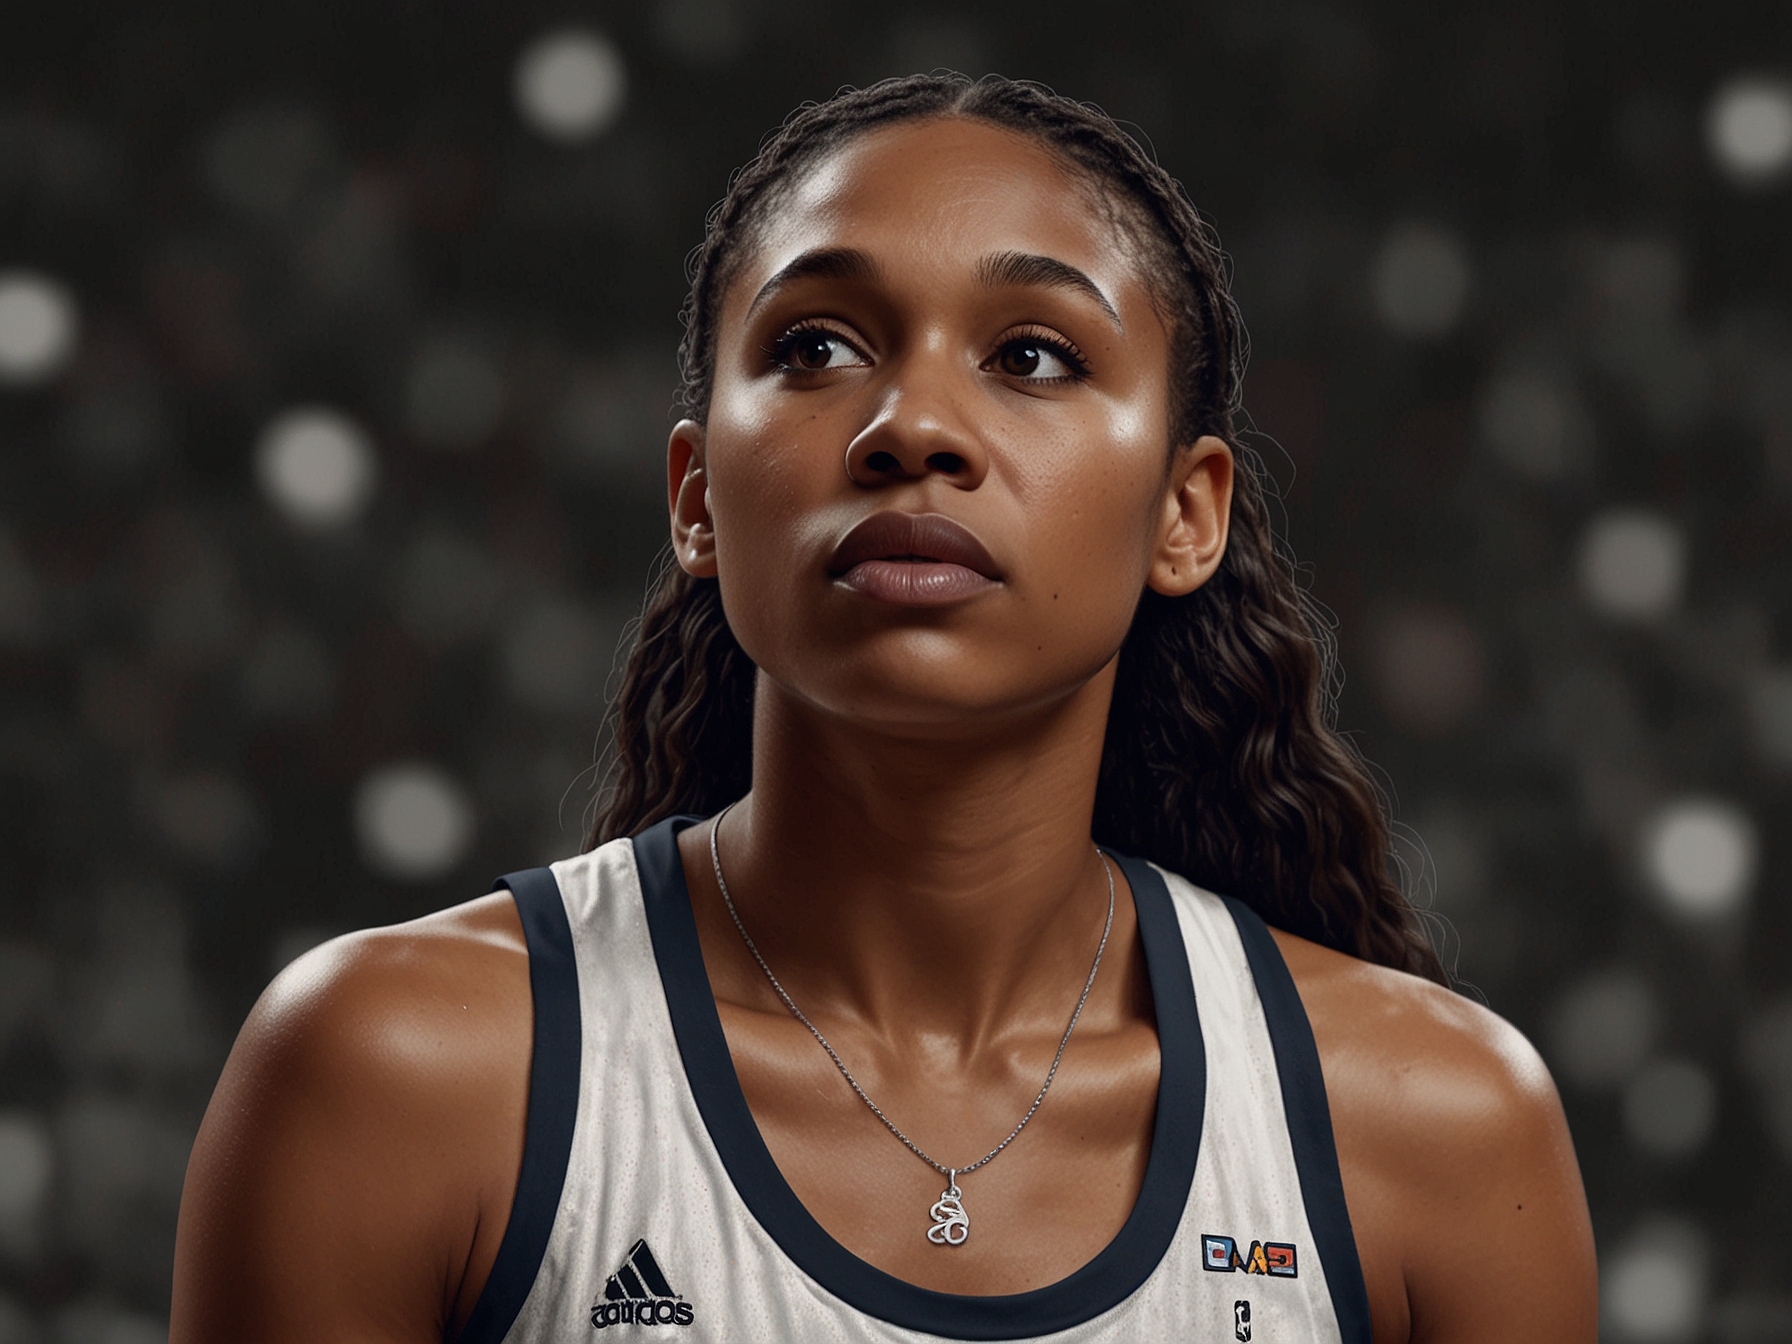 Angel Reese, in a WNBA game, standing on the court looking pensive, symbolizing her recent shift towards a more humble and reflective mindset.